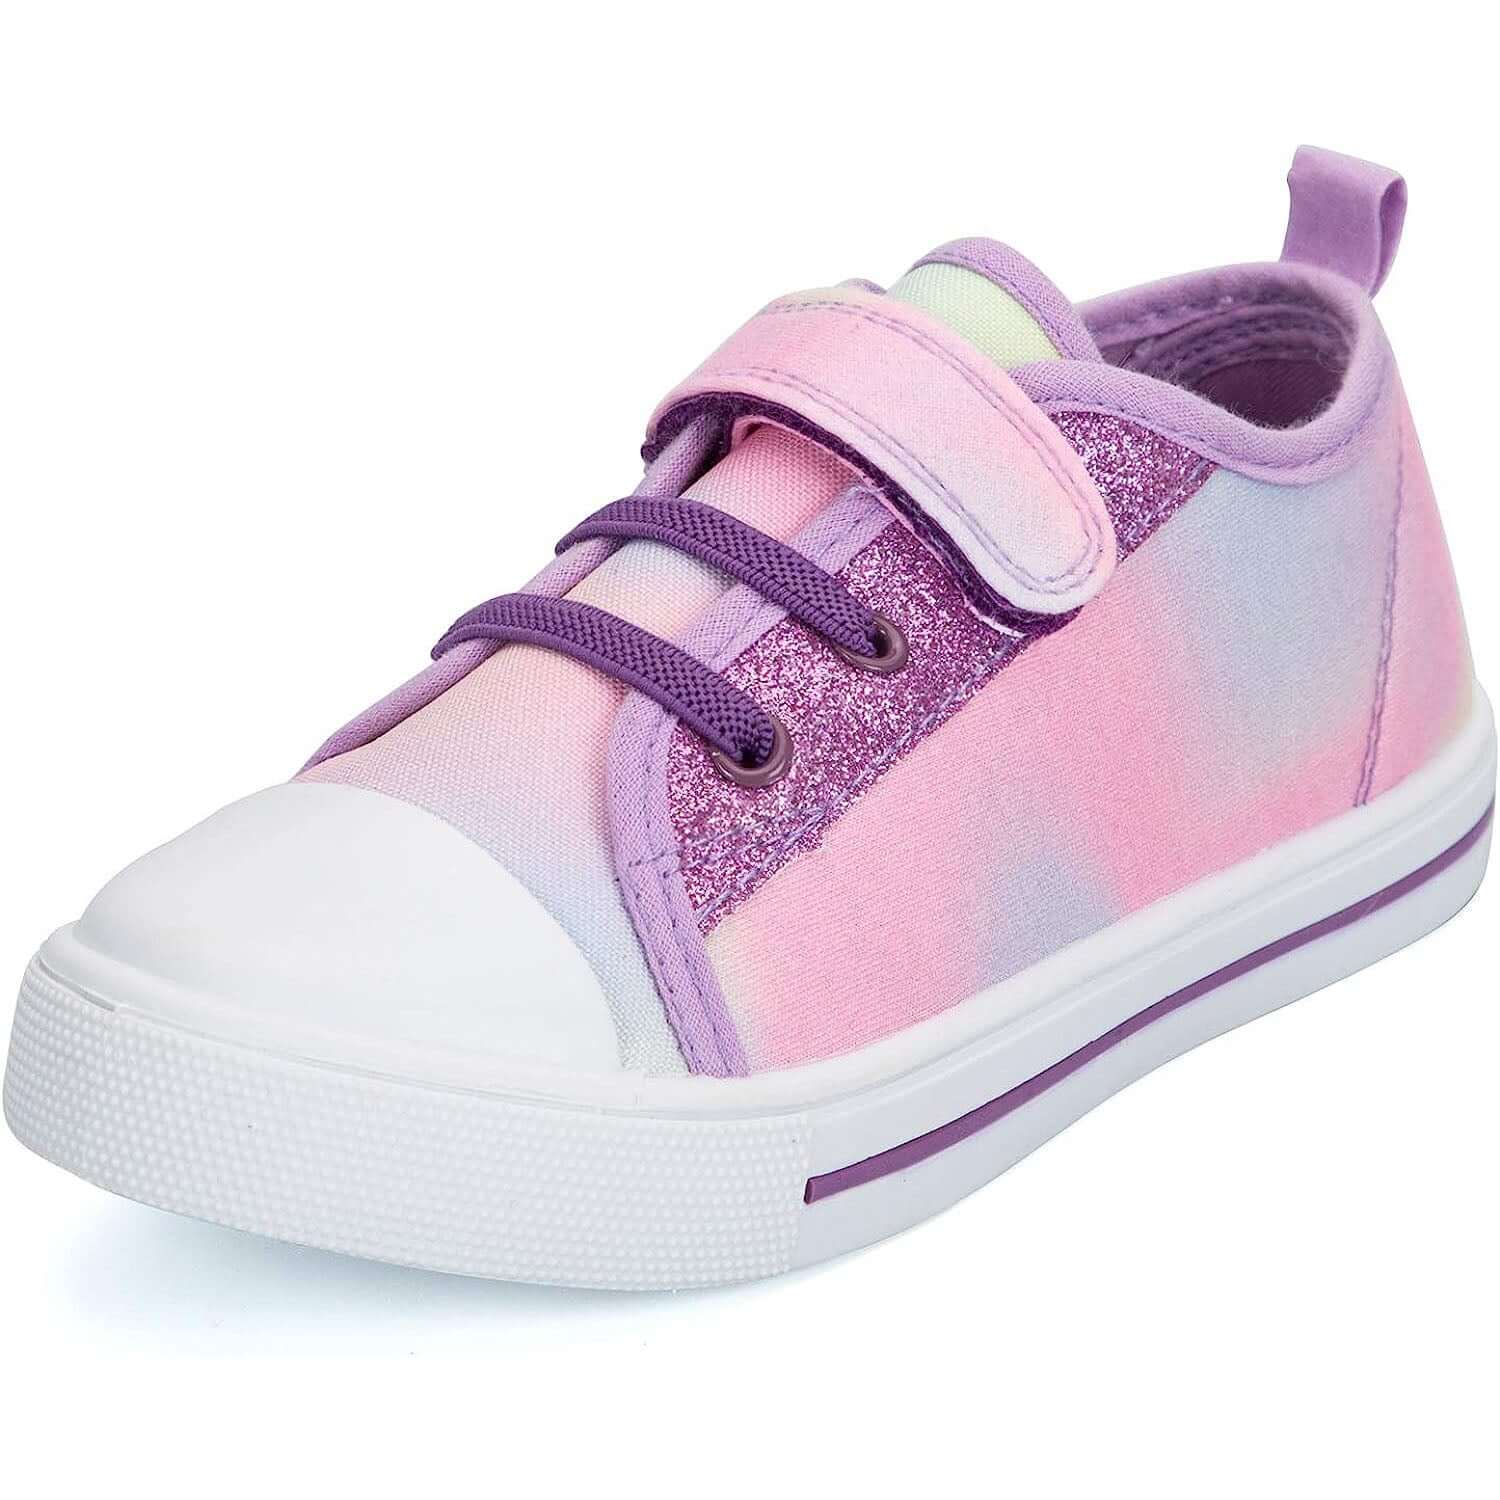 Primary Pink Lace-Up and Velcro Sneakers